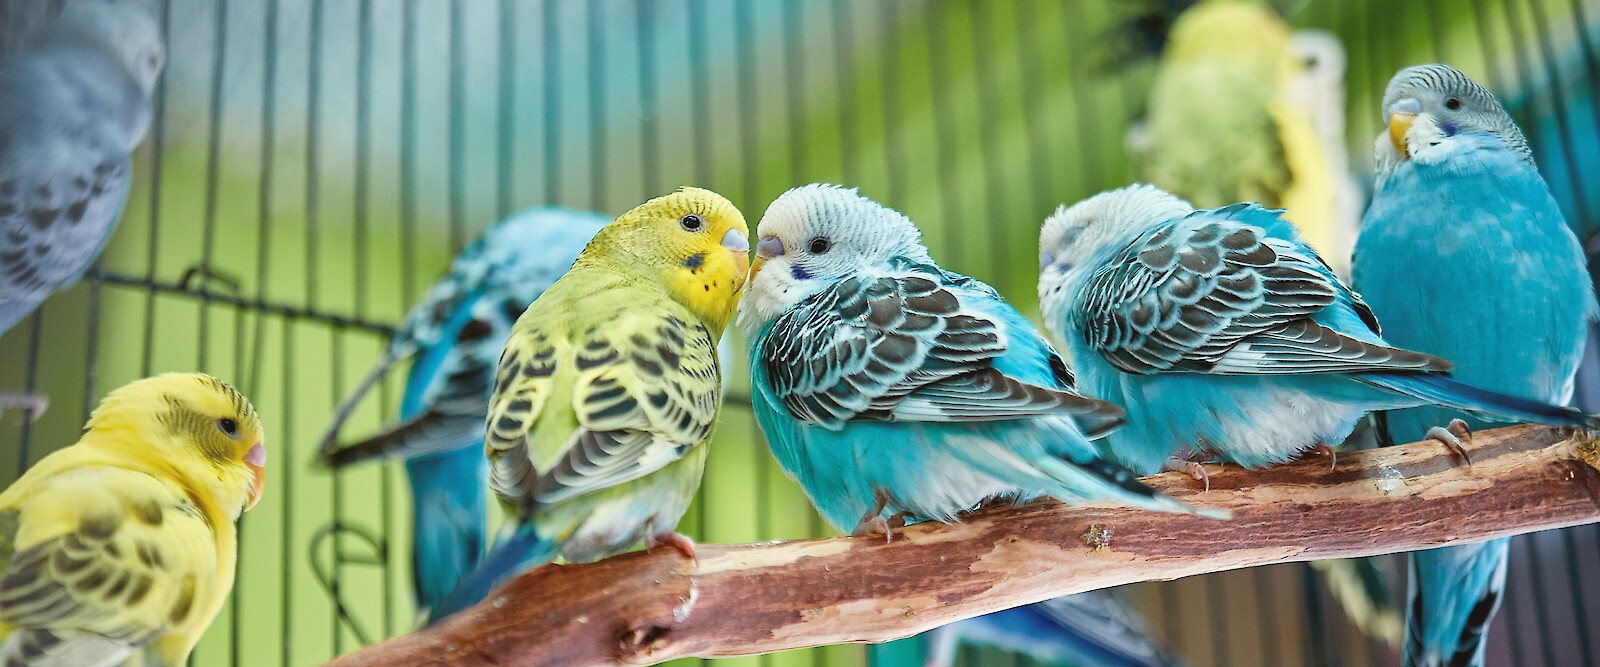 AdobeStock_321357977_Welling_parakeets_Branch_Cage